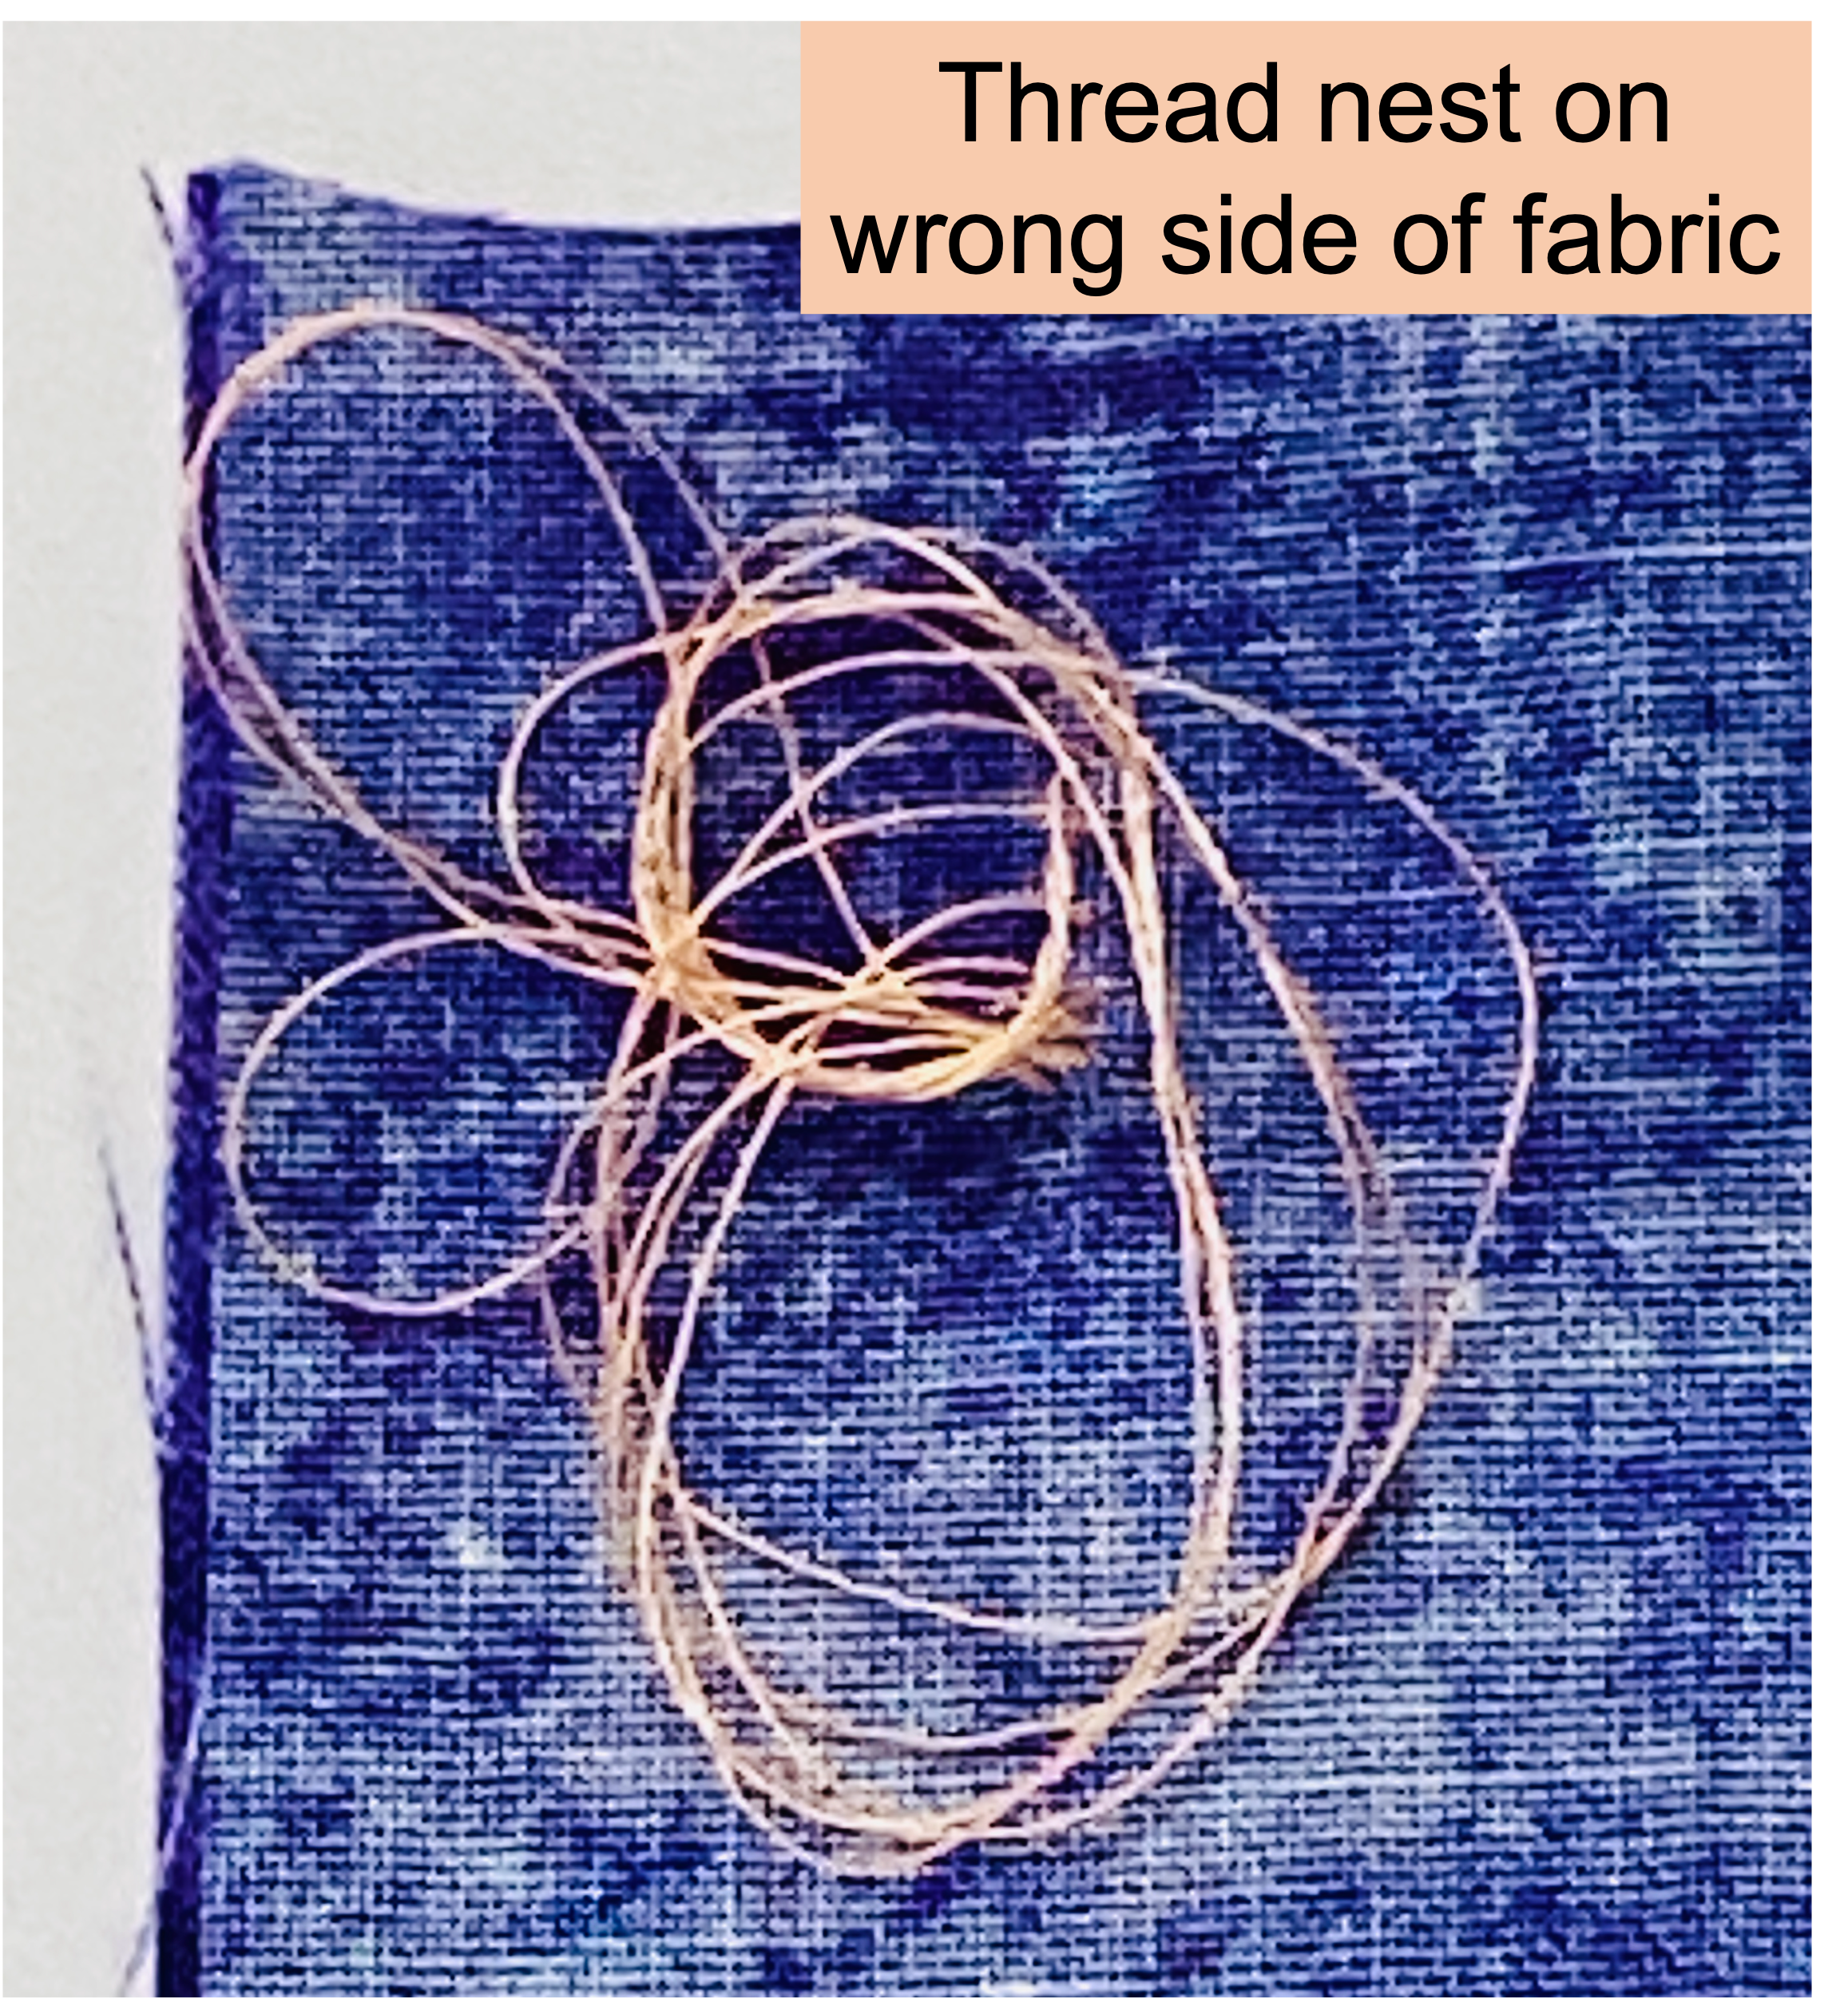 Thread nest on wrong side of fabric